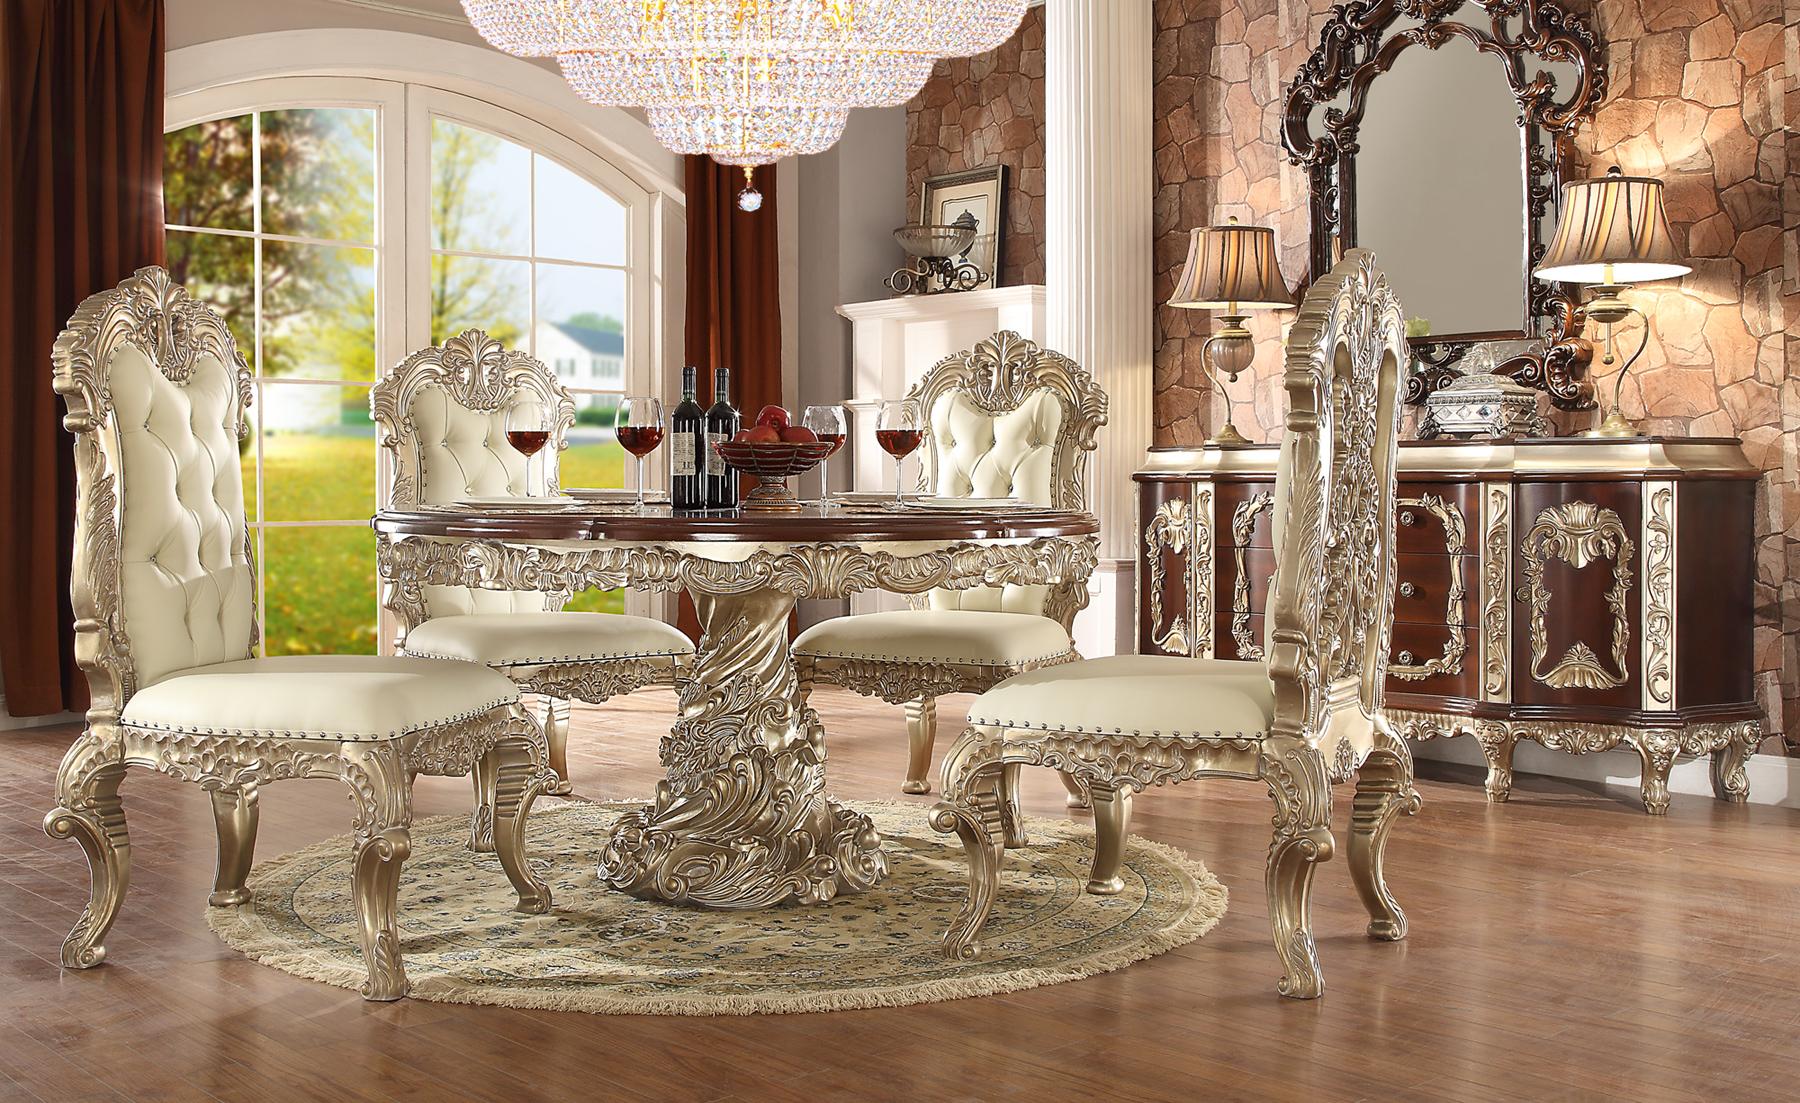 Traditional Dining Room Set HD-8017 – 5PC DINING TABLE SET HD-8017-RTSET5 in Antique White, Silver Faux Leather